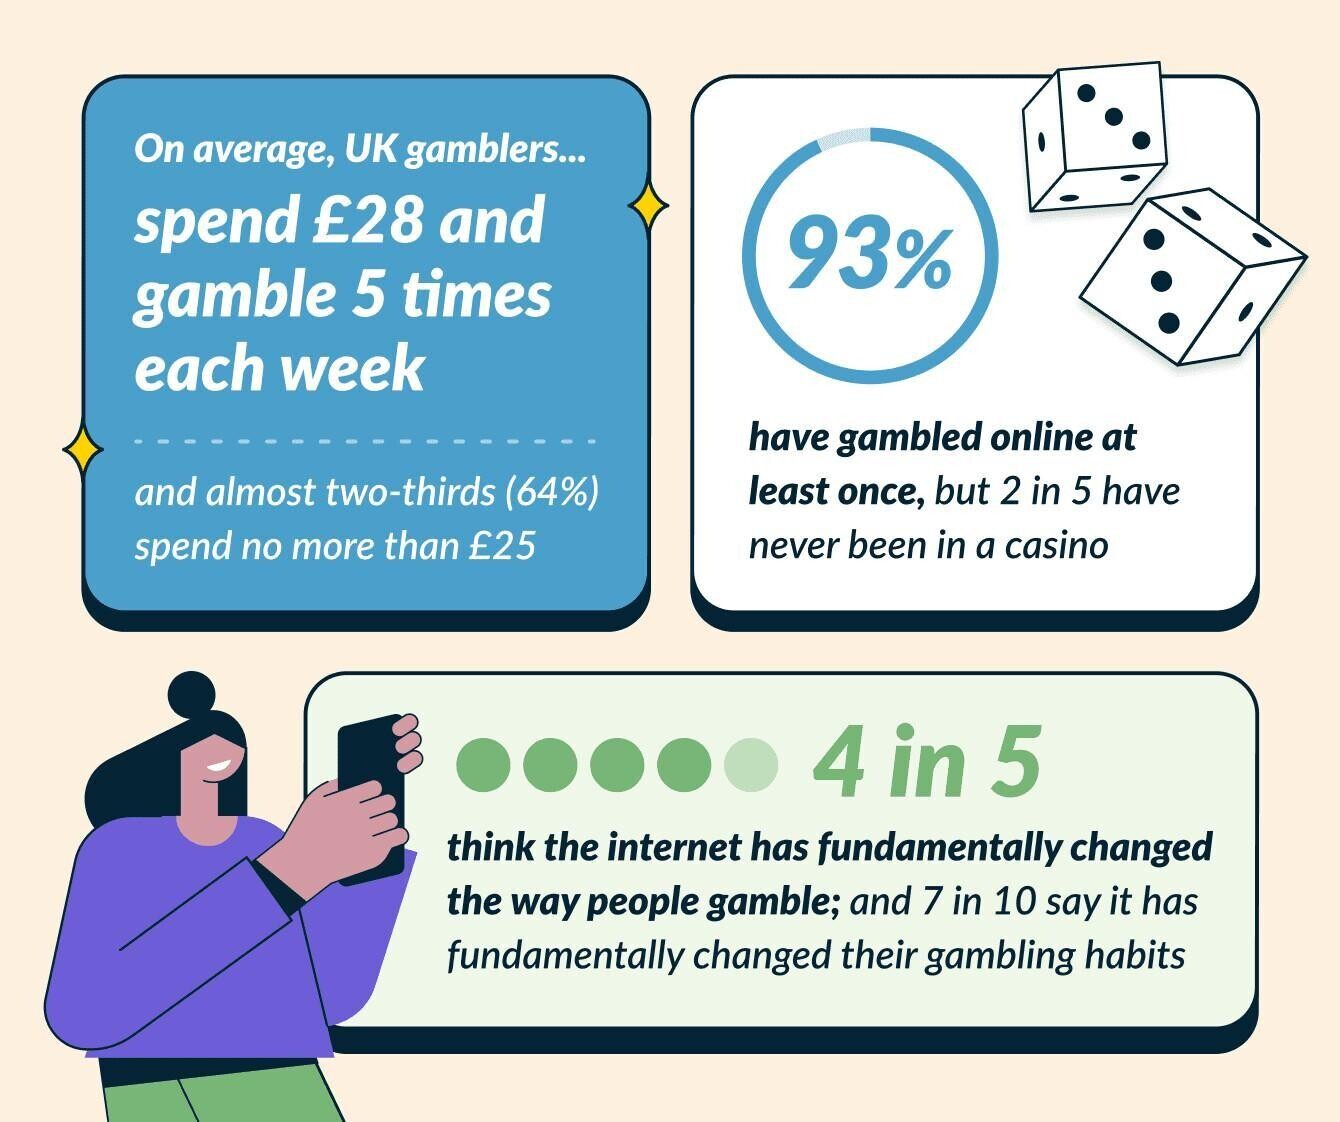 93% have gambled online at least once